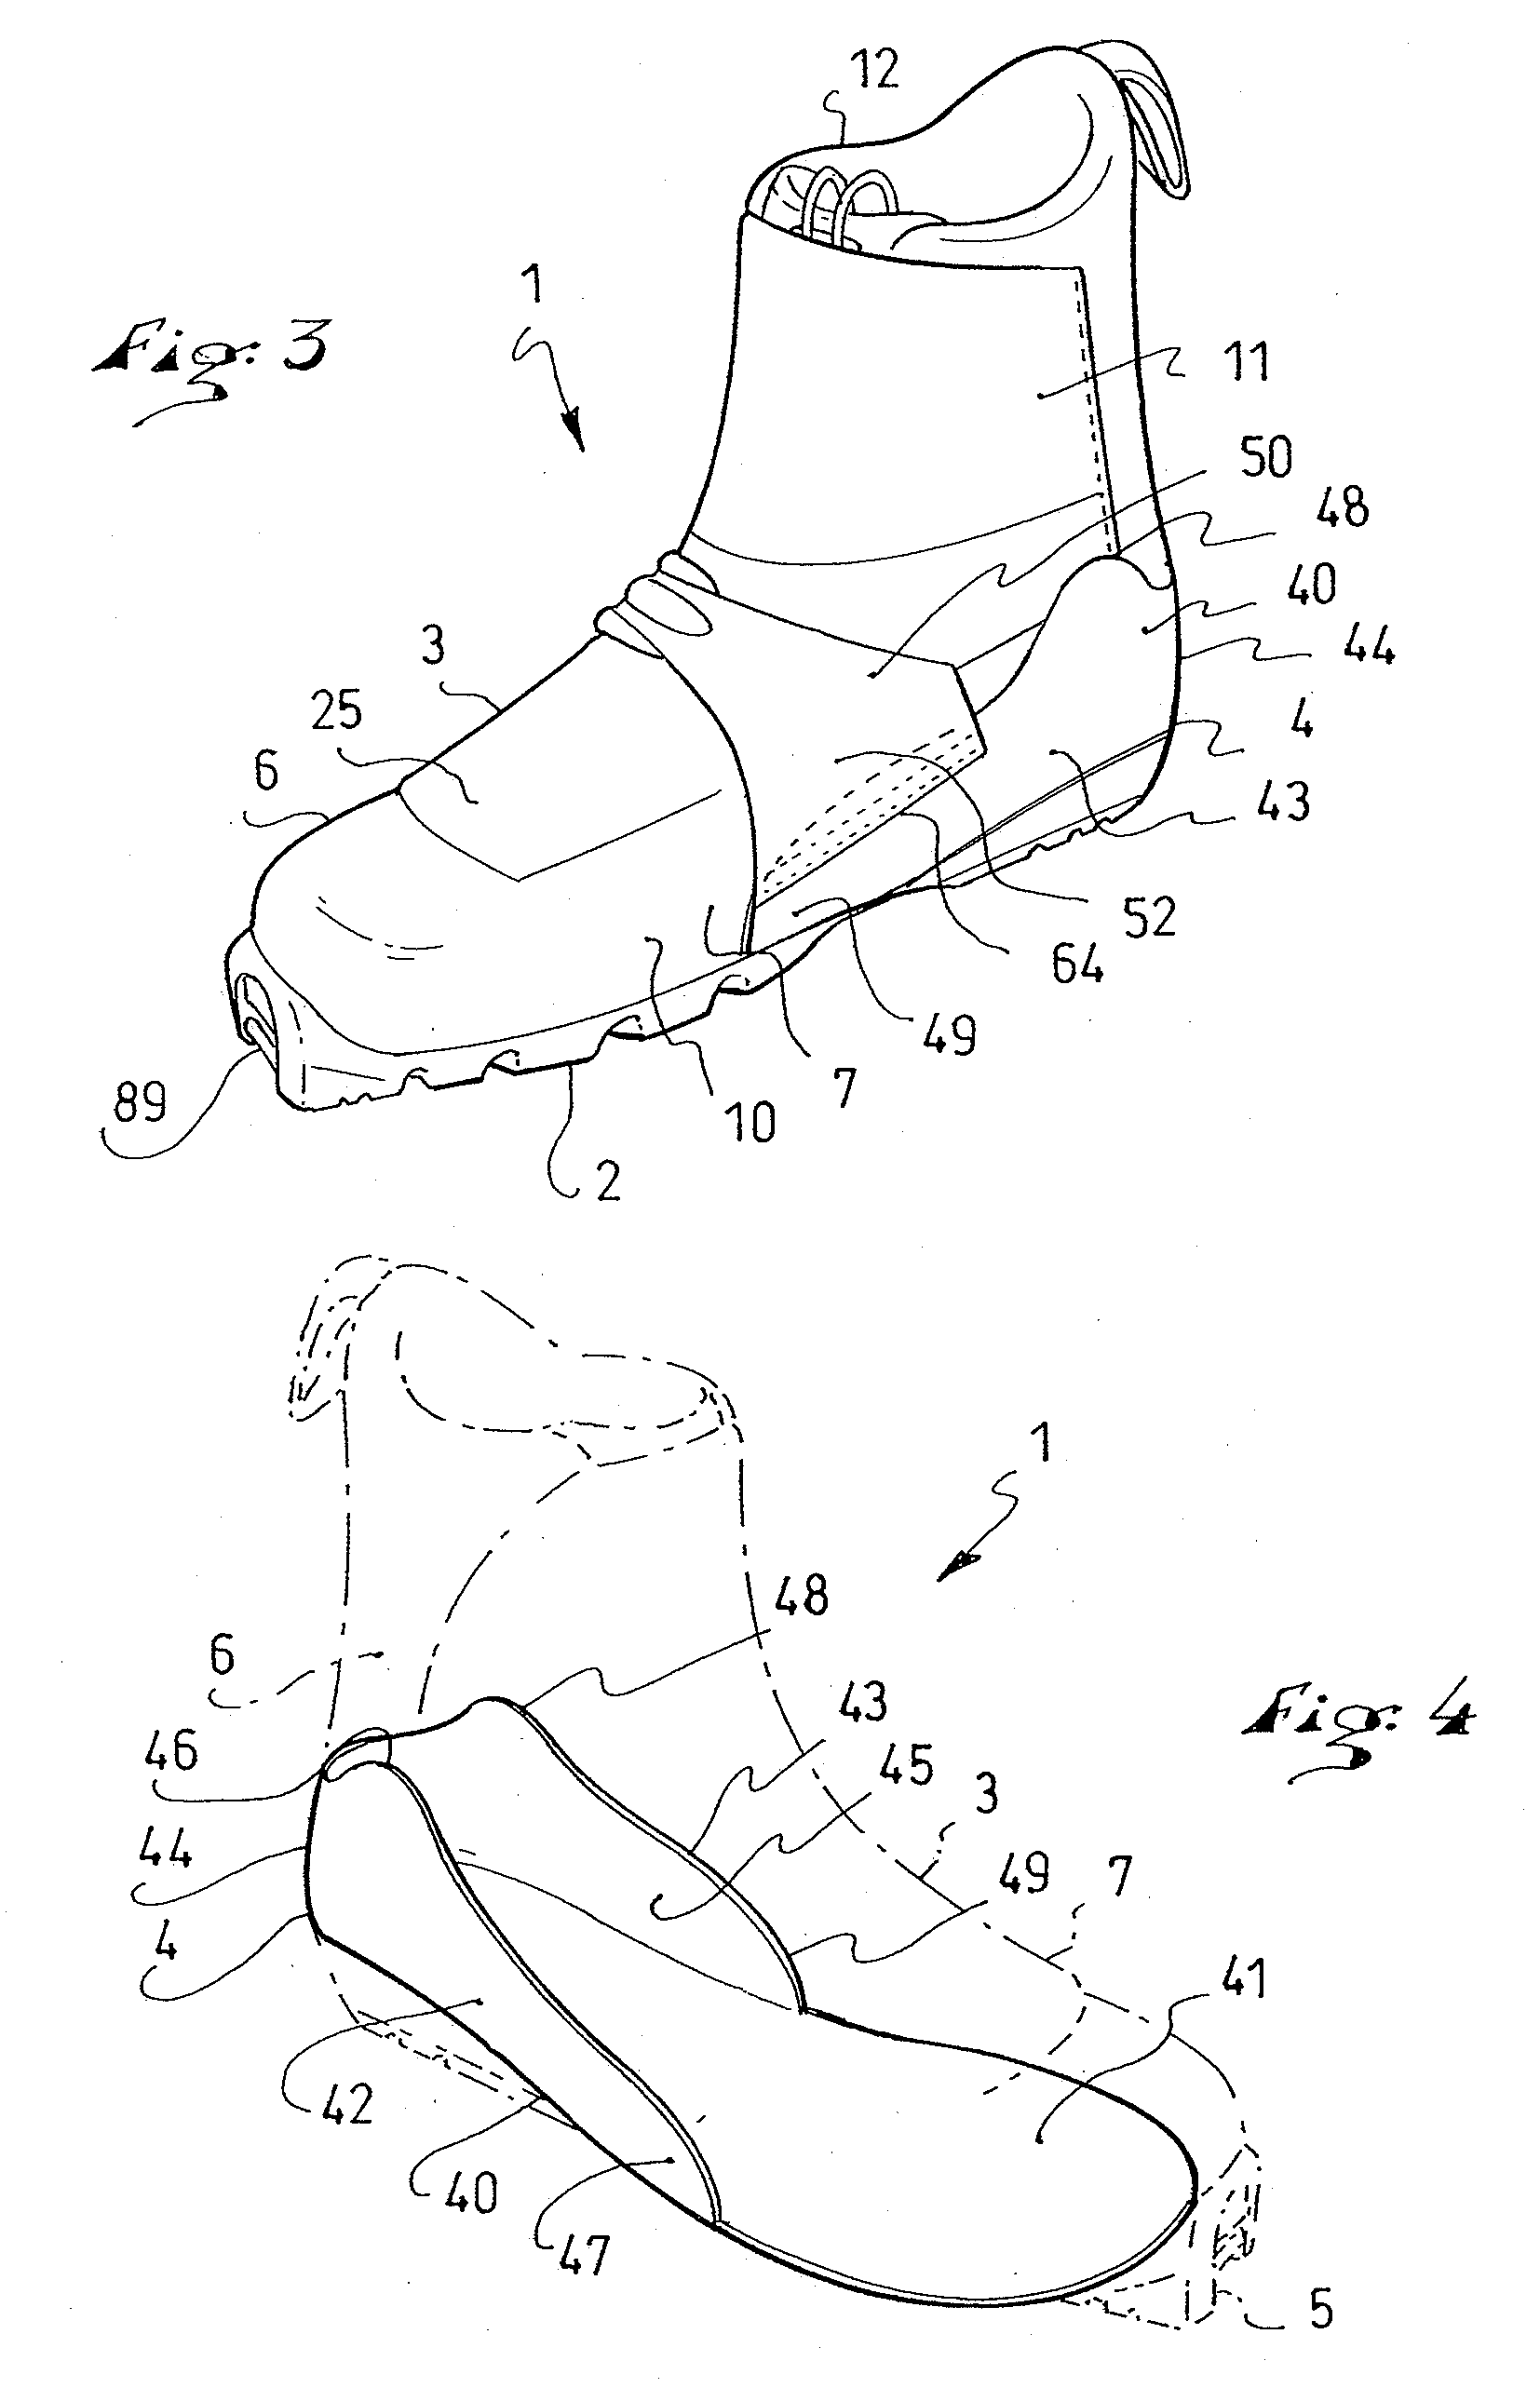 Boot with improved tightening of the upper